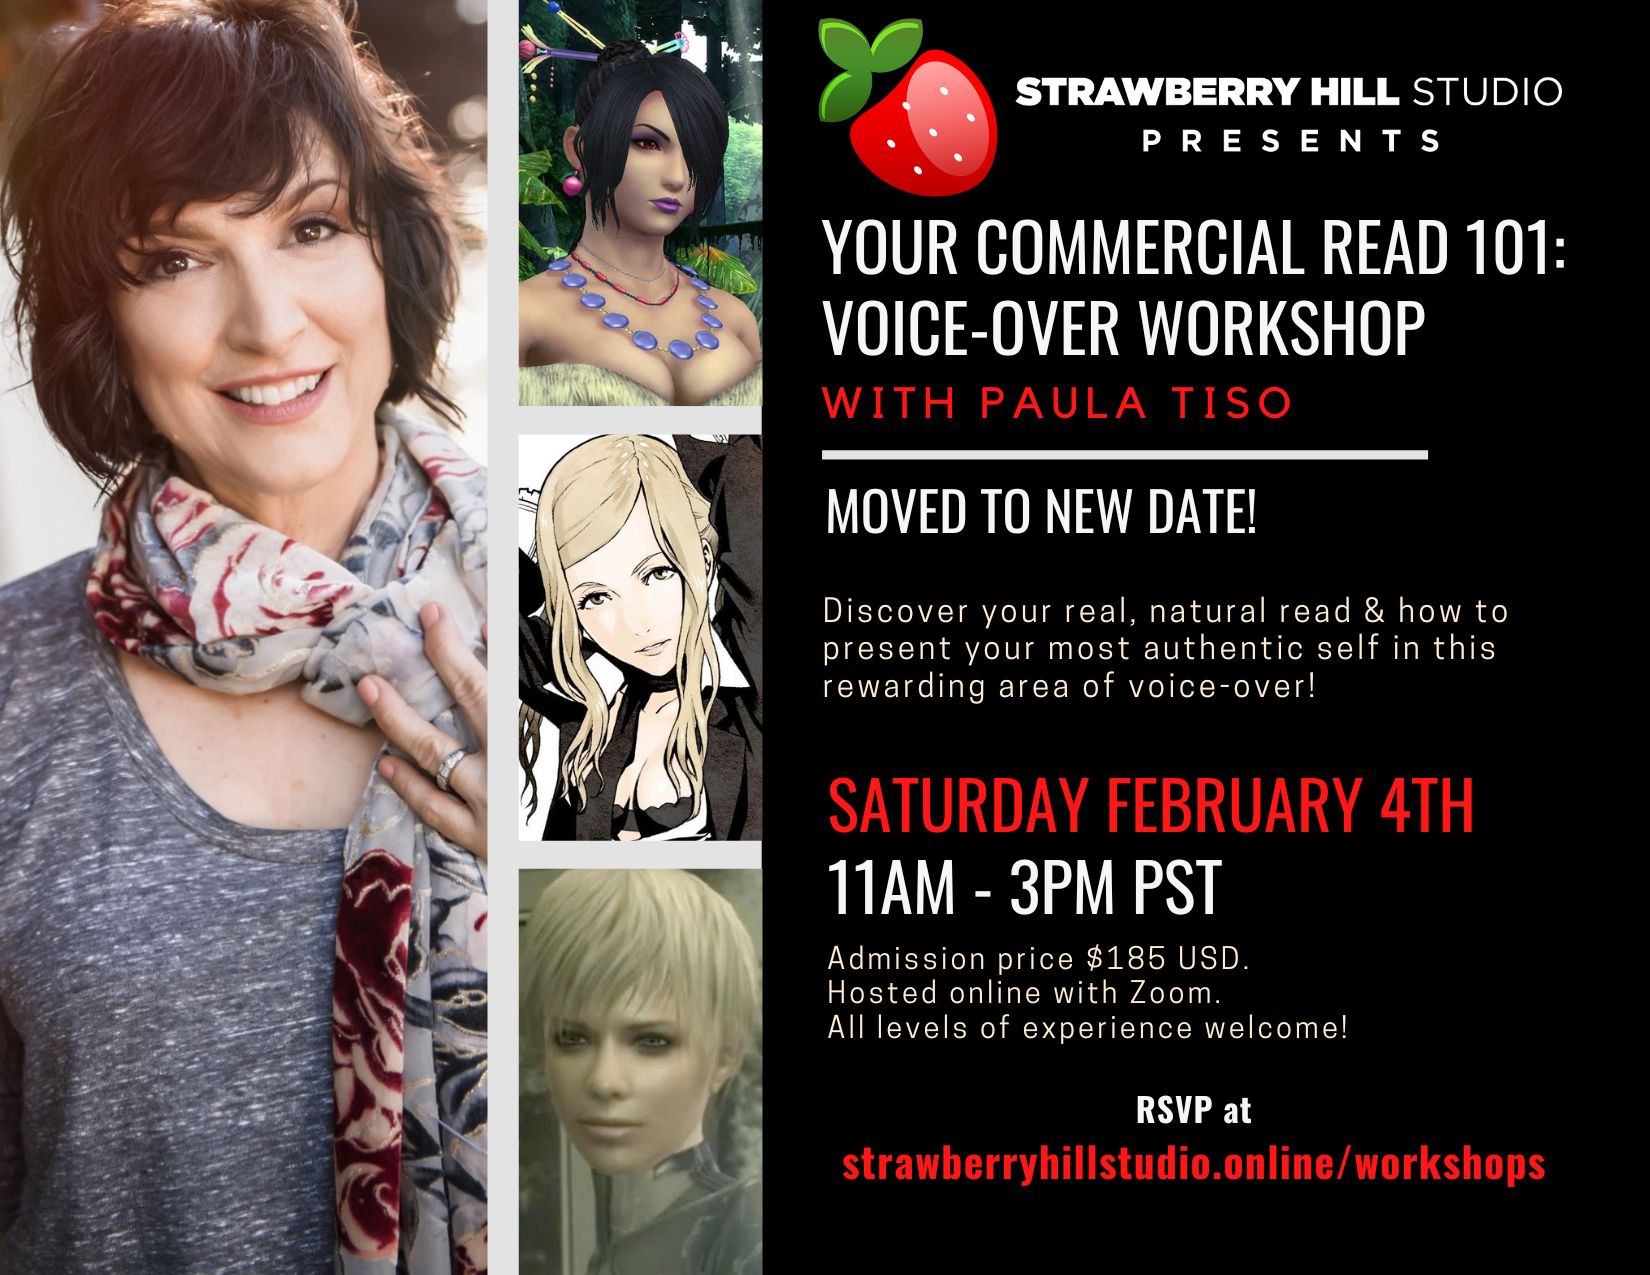 NEW DATE - Your Commercial Read 101 Voice-Over Workshop w/ Paula Tiso